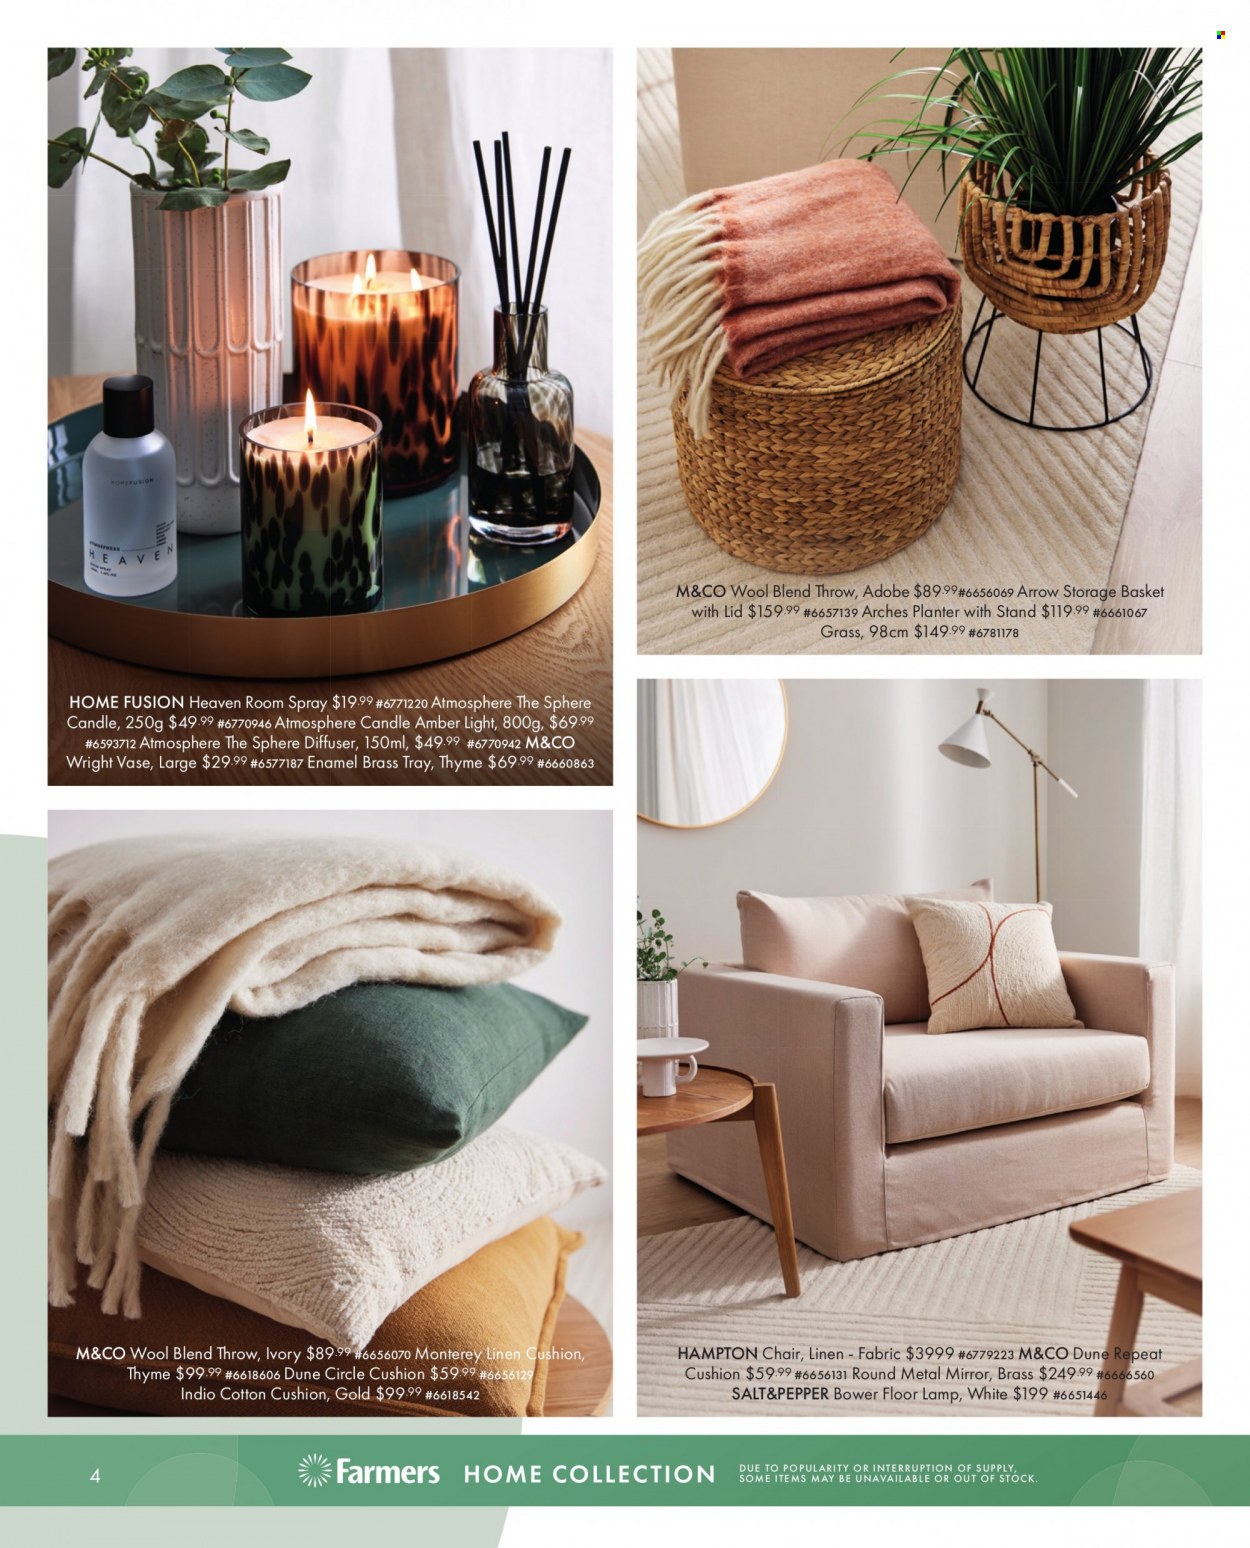 thumbnail - Farmers mailer - Sales products - basket, storage basket, tray, candle, diffuser, cushion, linens, chair. Page 4.